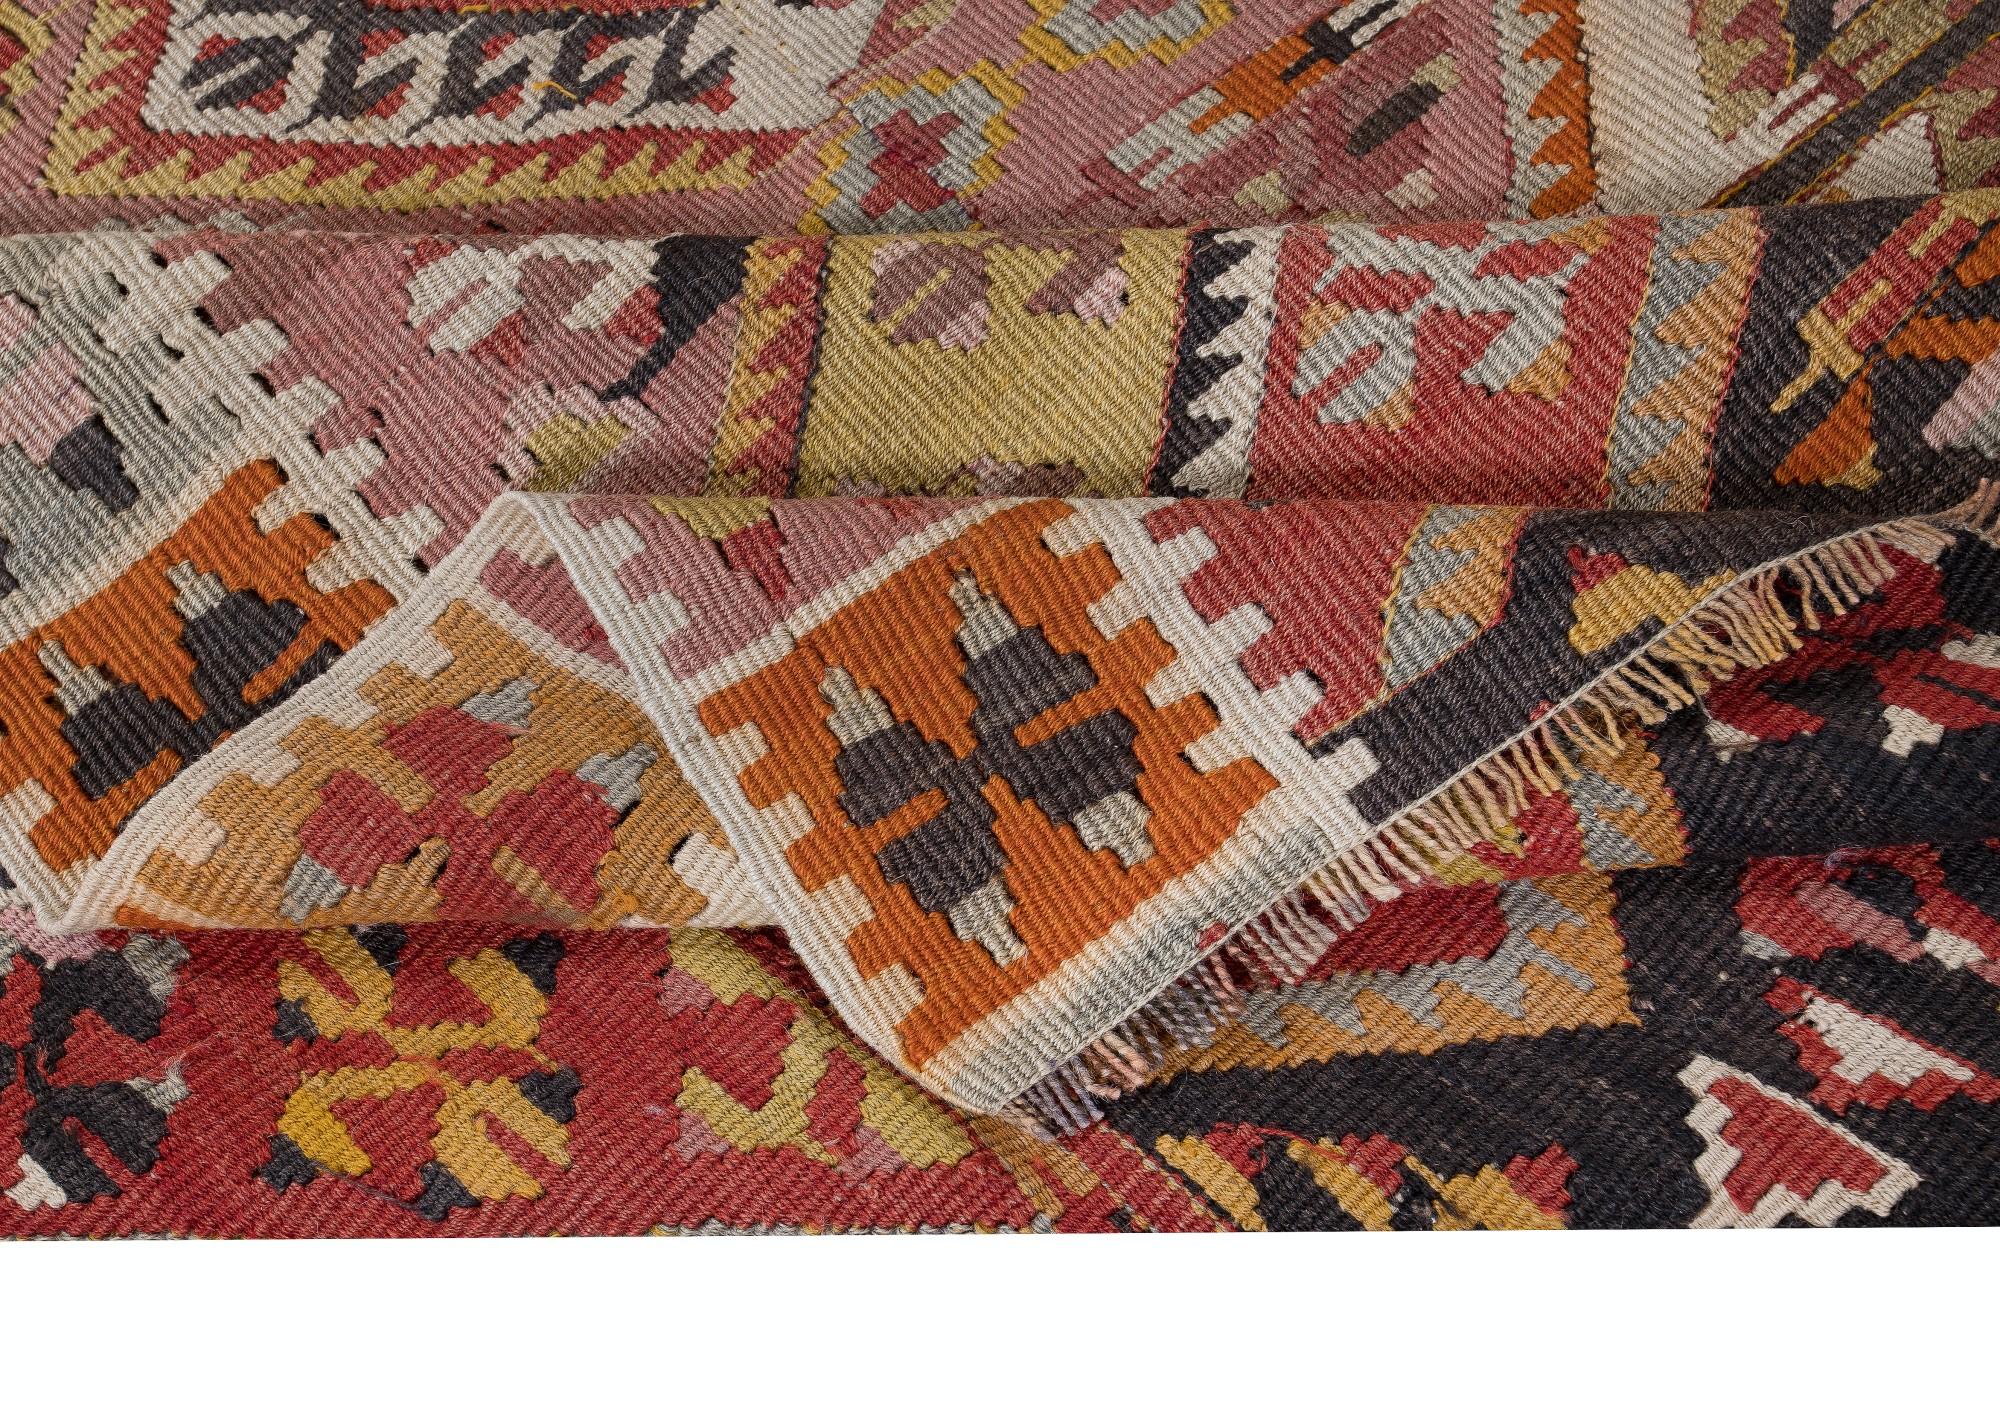 Embark on a journey through Turkish tradition with this exquisite vintage handwoven Turkish wool kilim rug, a testament to the enduring craftsmanship of Anatolian artisans. Woven with meticulous care and attention to detail, this kilim rug